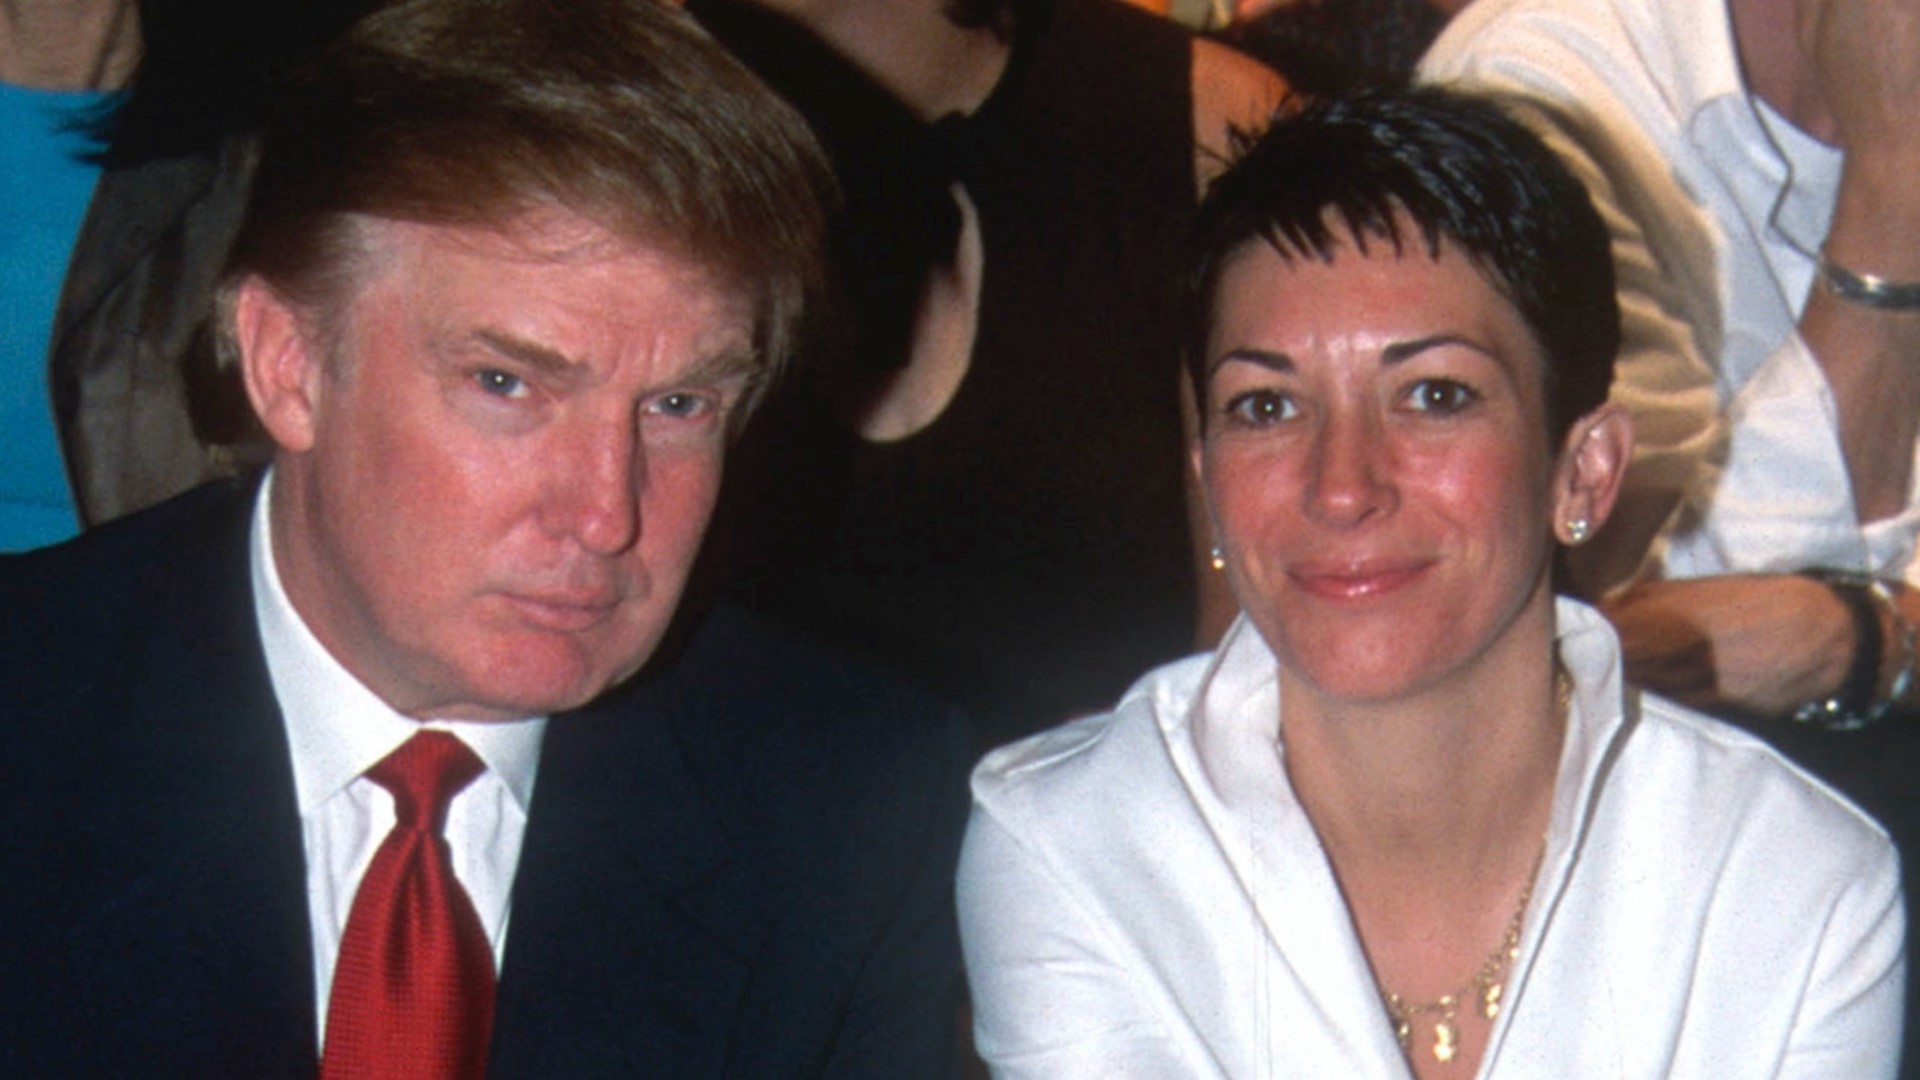 It's well known that Donald Trump and Jeffrey Epstein were friends. Veuer's Tony Spitz has the details.